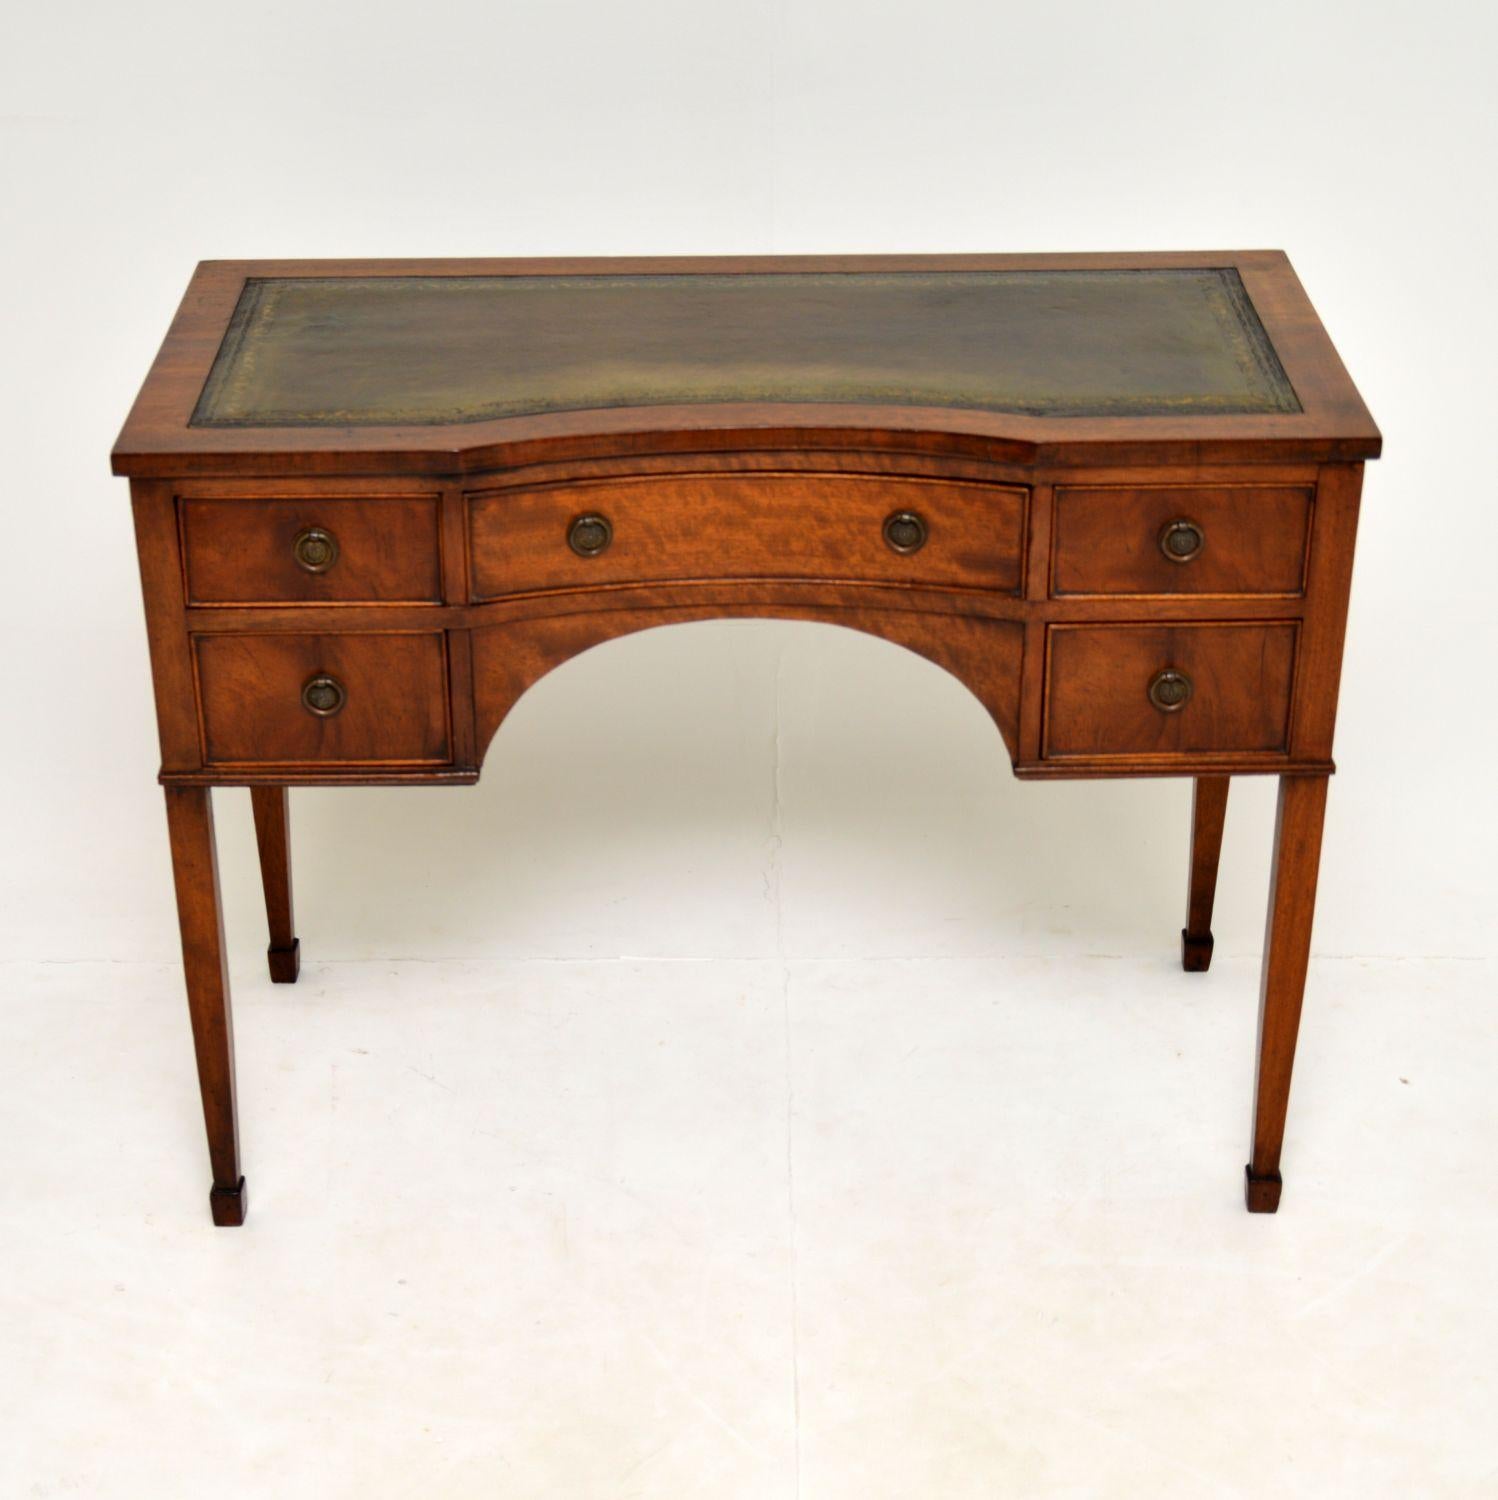 A lovely antique writing table in mahogany, with an inset leather top. This dates from around the 1900-1910 period & is antique Sheraton style.

It is of superb quality, and is beautifully made from mahogany. This has an inverted serpentine front,